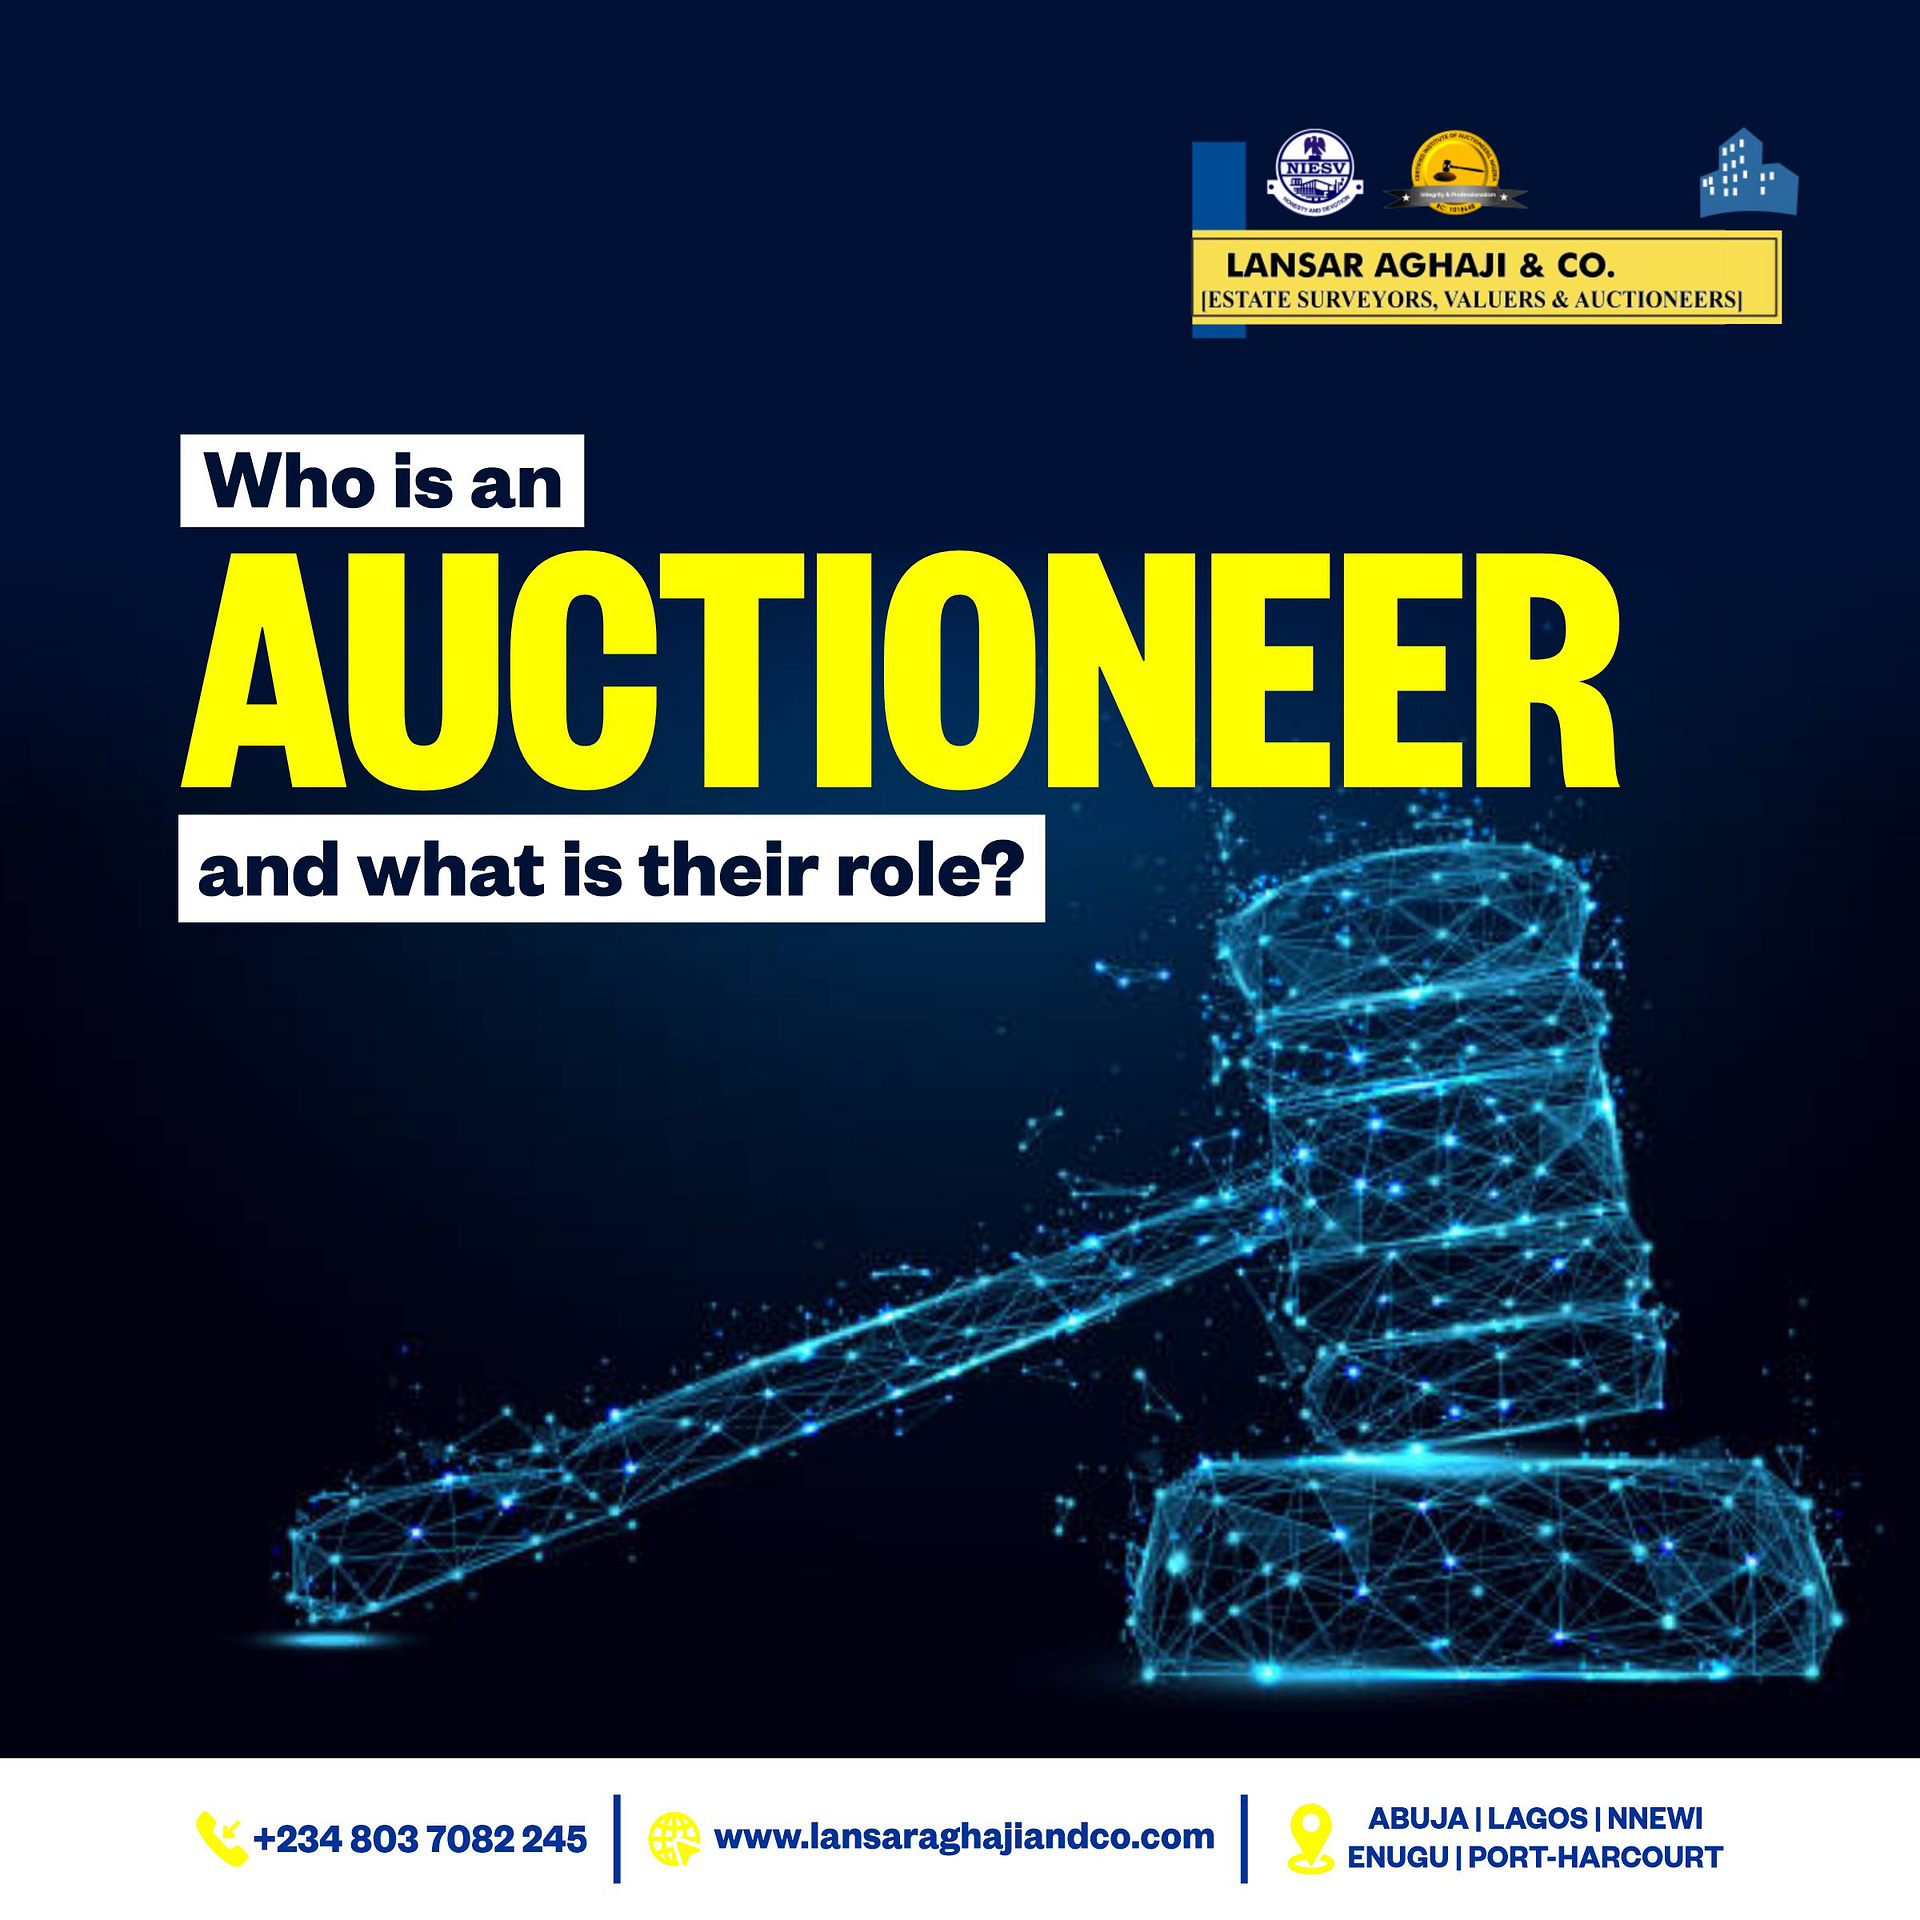 Who Is an Auctioneer and Their Roles